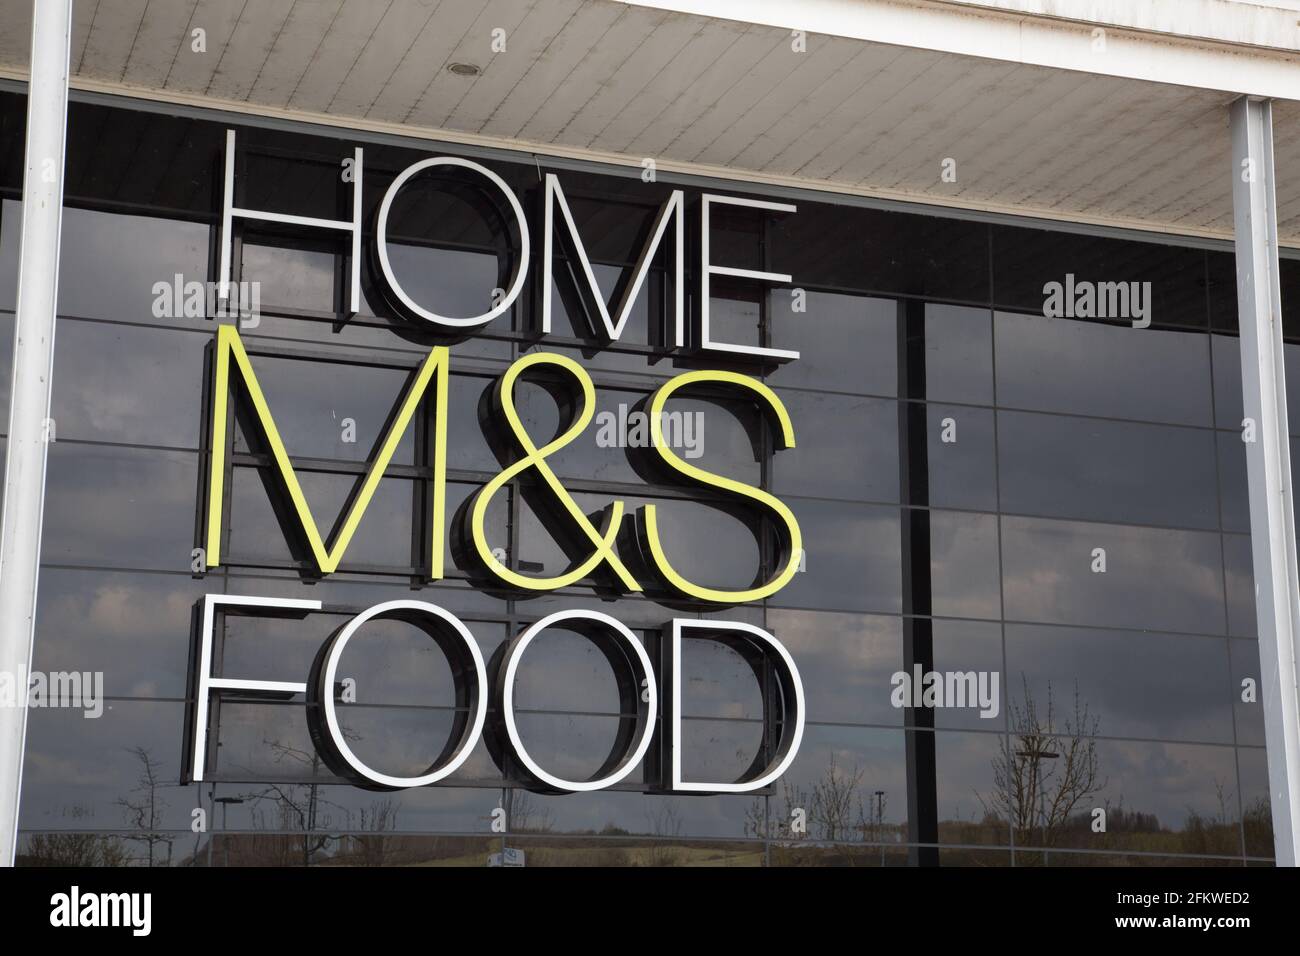 M&S Home and Food store Stock Photo